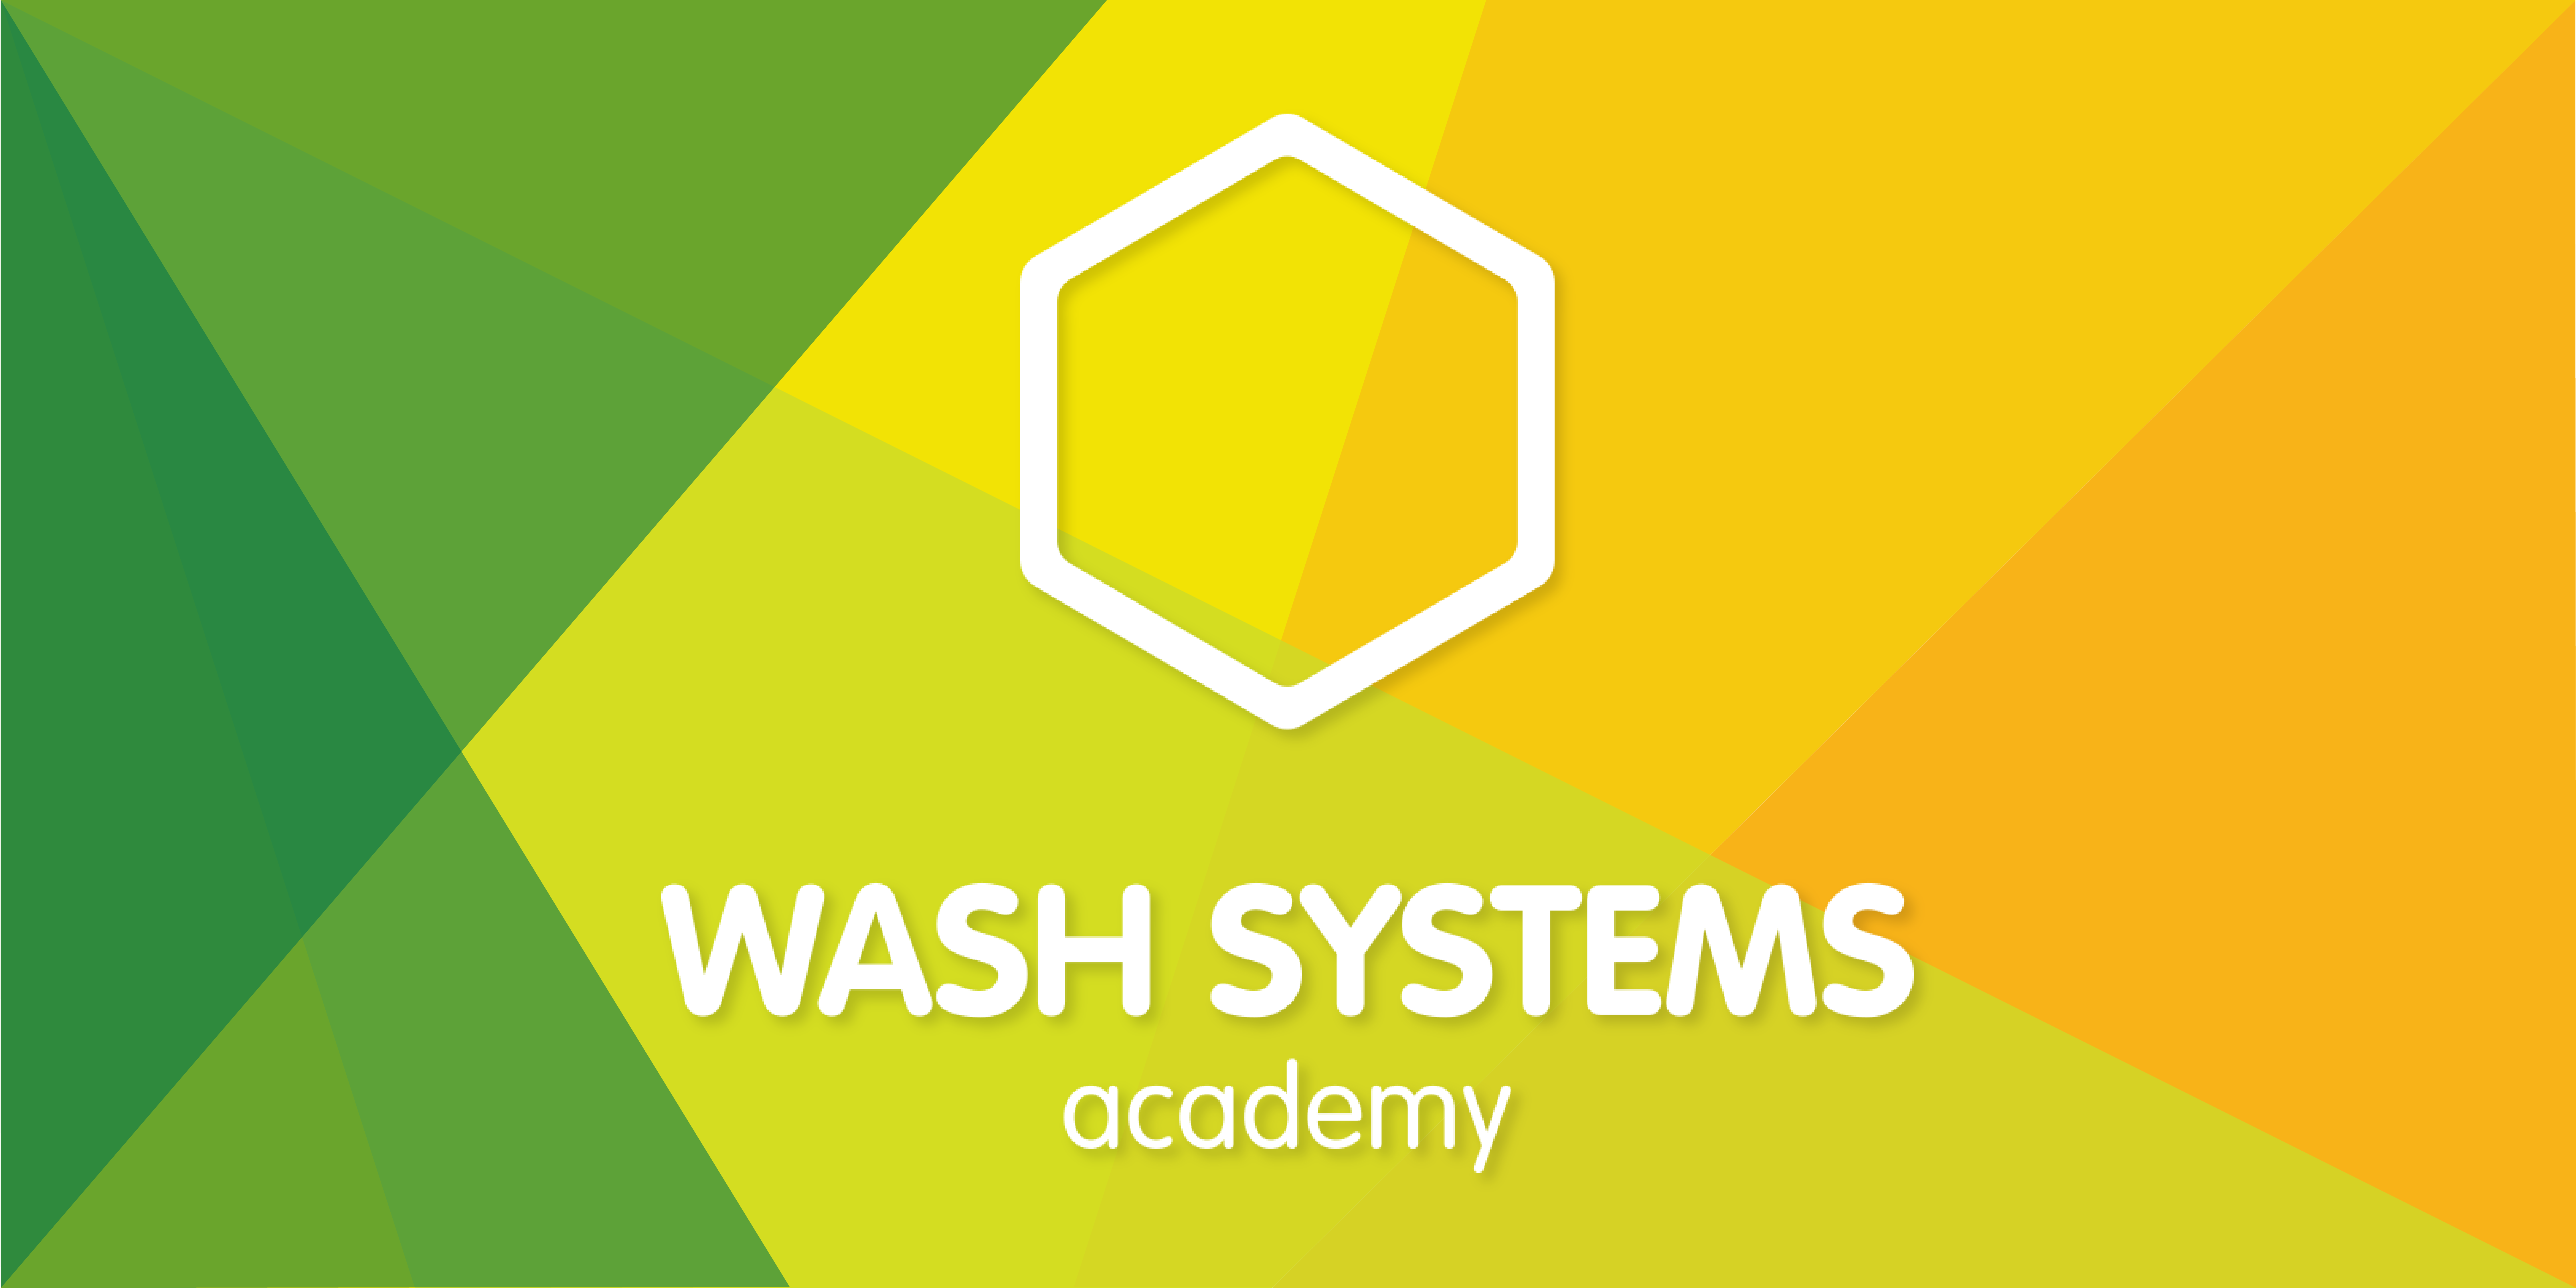 WASH Systems Academy - advocacy course